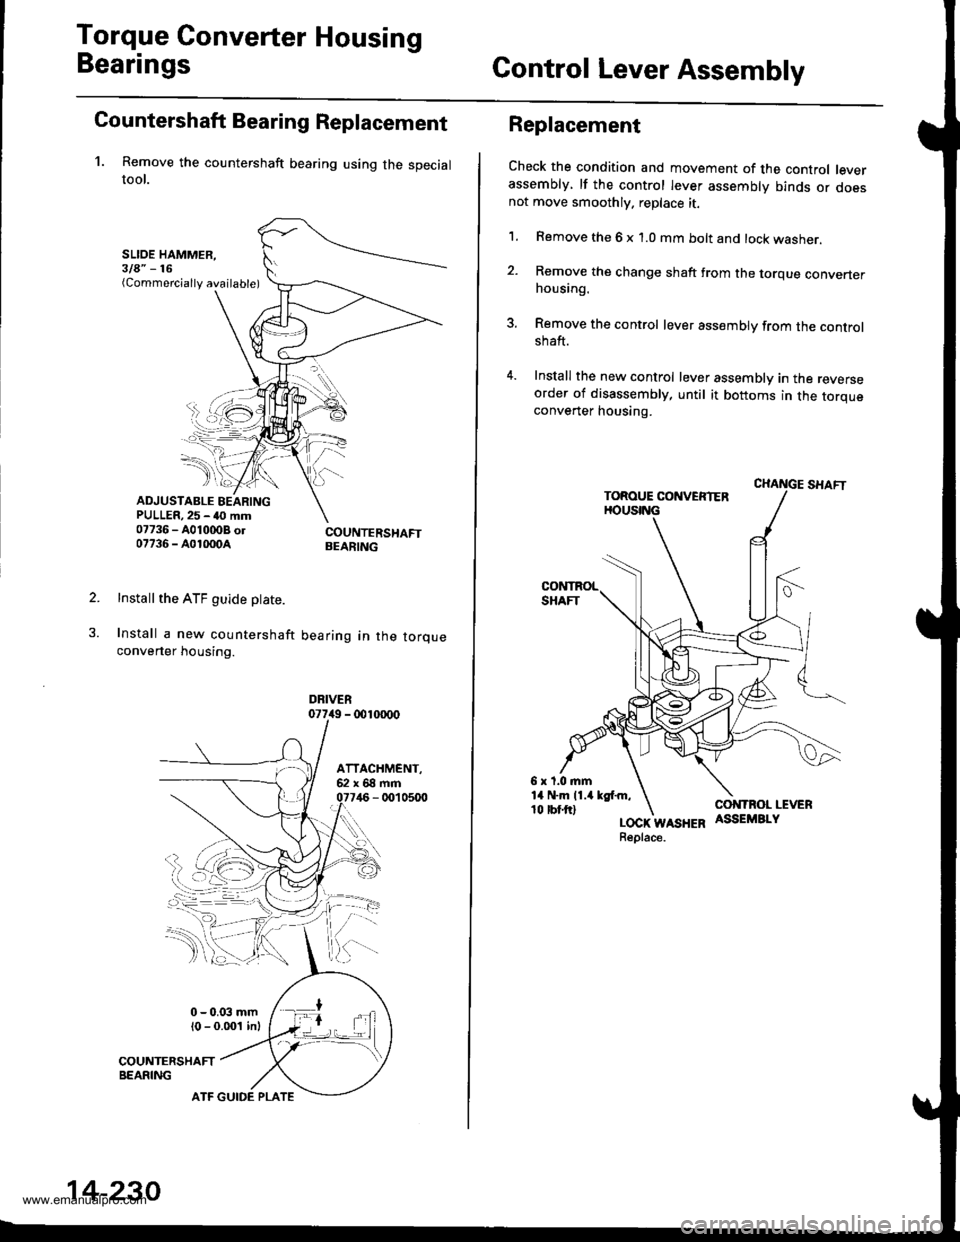 HONDA CR-V 1999 RD1-RD3 / 1.G Workshop Manual 
Torque Gonverter Housing
BearingsGontrol Lever Assembly
Countershaft Bearing Replacement
1. Remove the countershaft bearing using the specialtool.
SLIOE HAMMER,3la" -16(Commercially available)
ADJUST